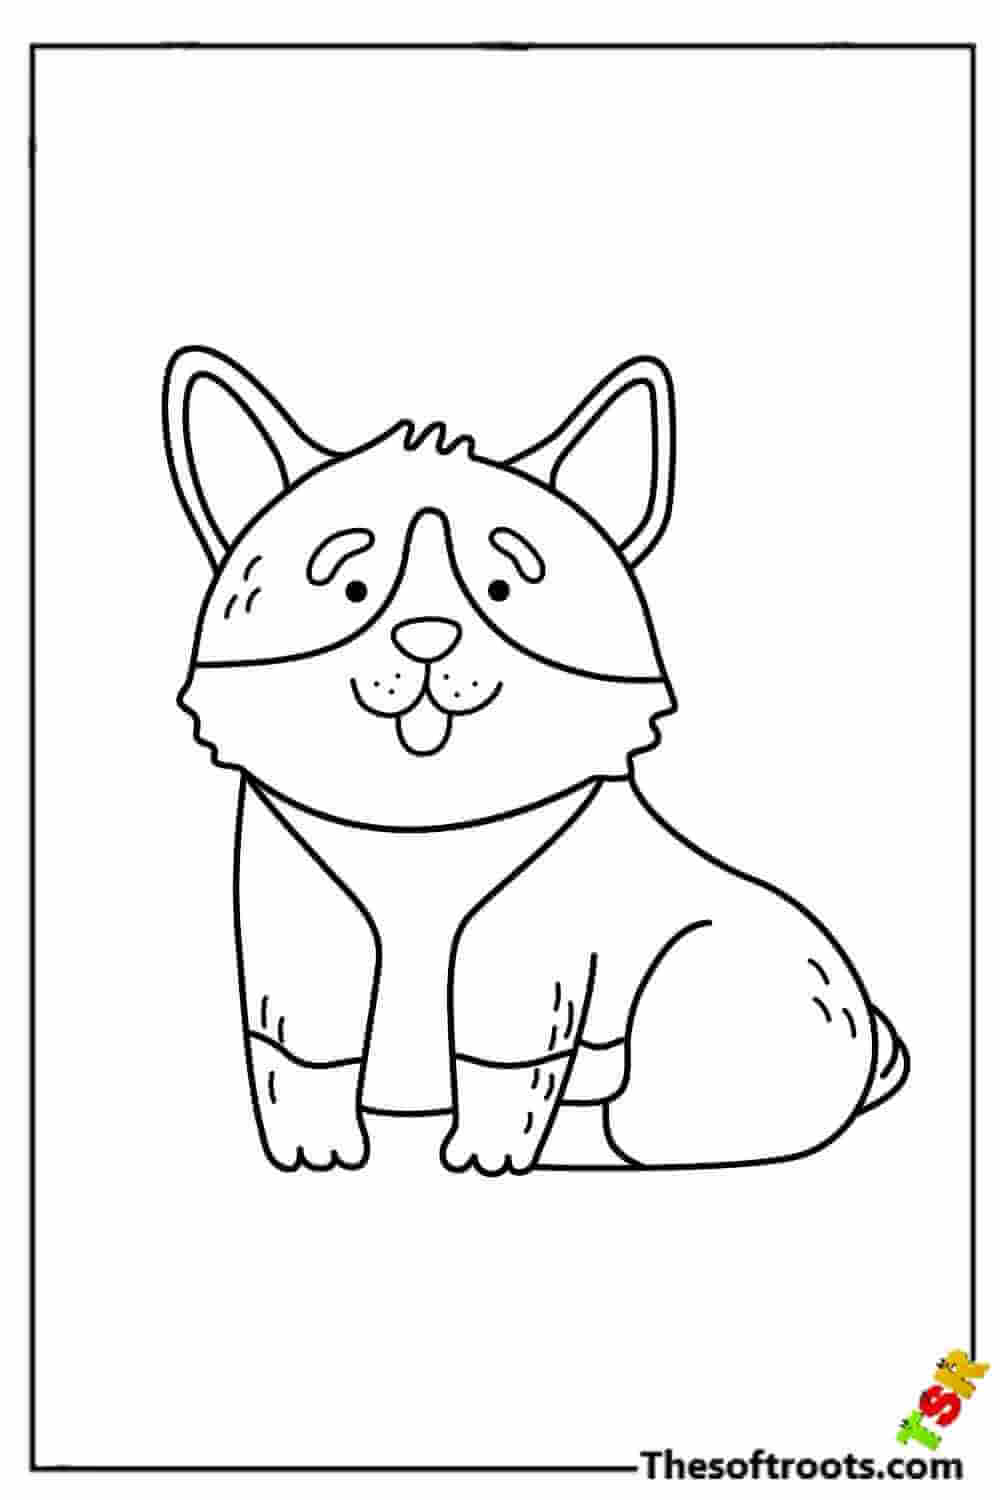 Innocent puppy coloring pages